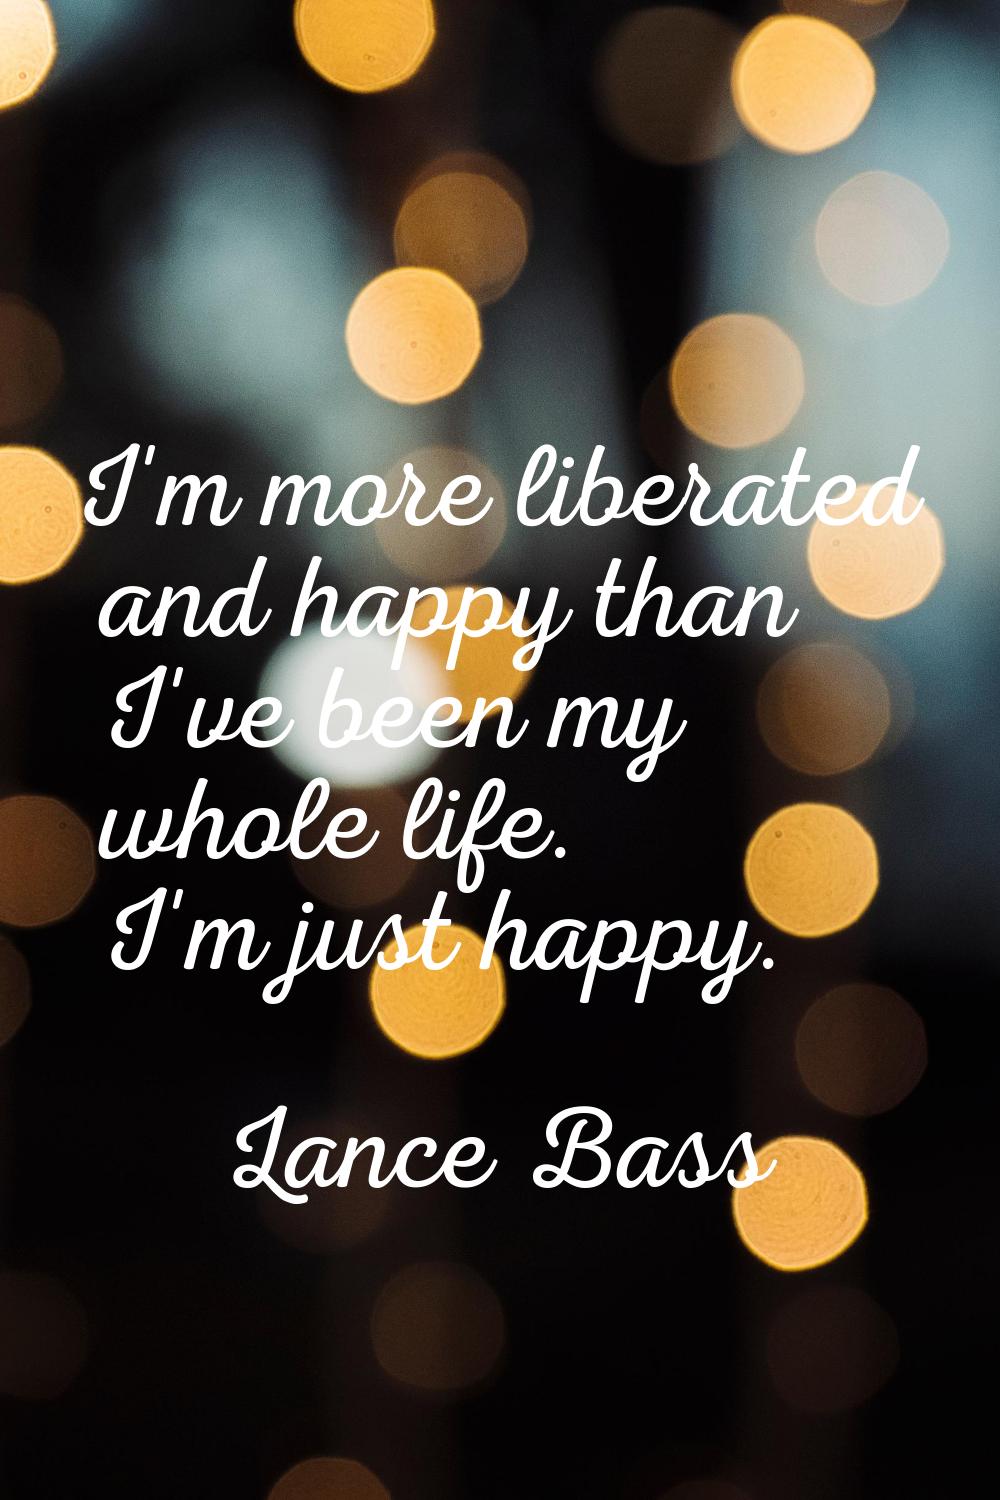 I'm more liberated and happy than I've been my whole life. I'm just happy.